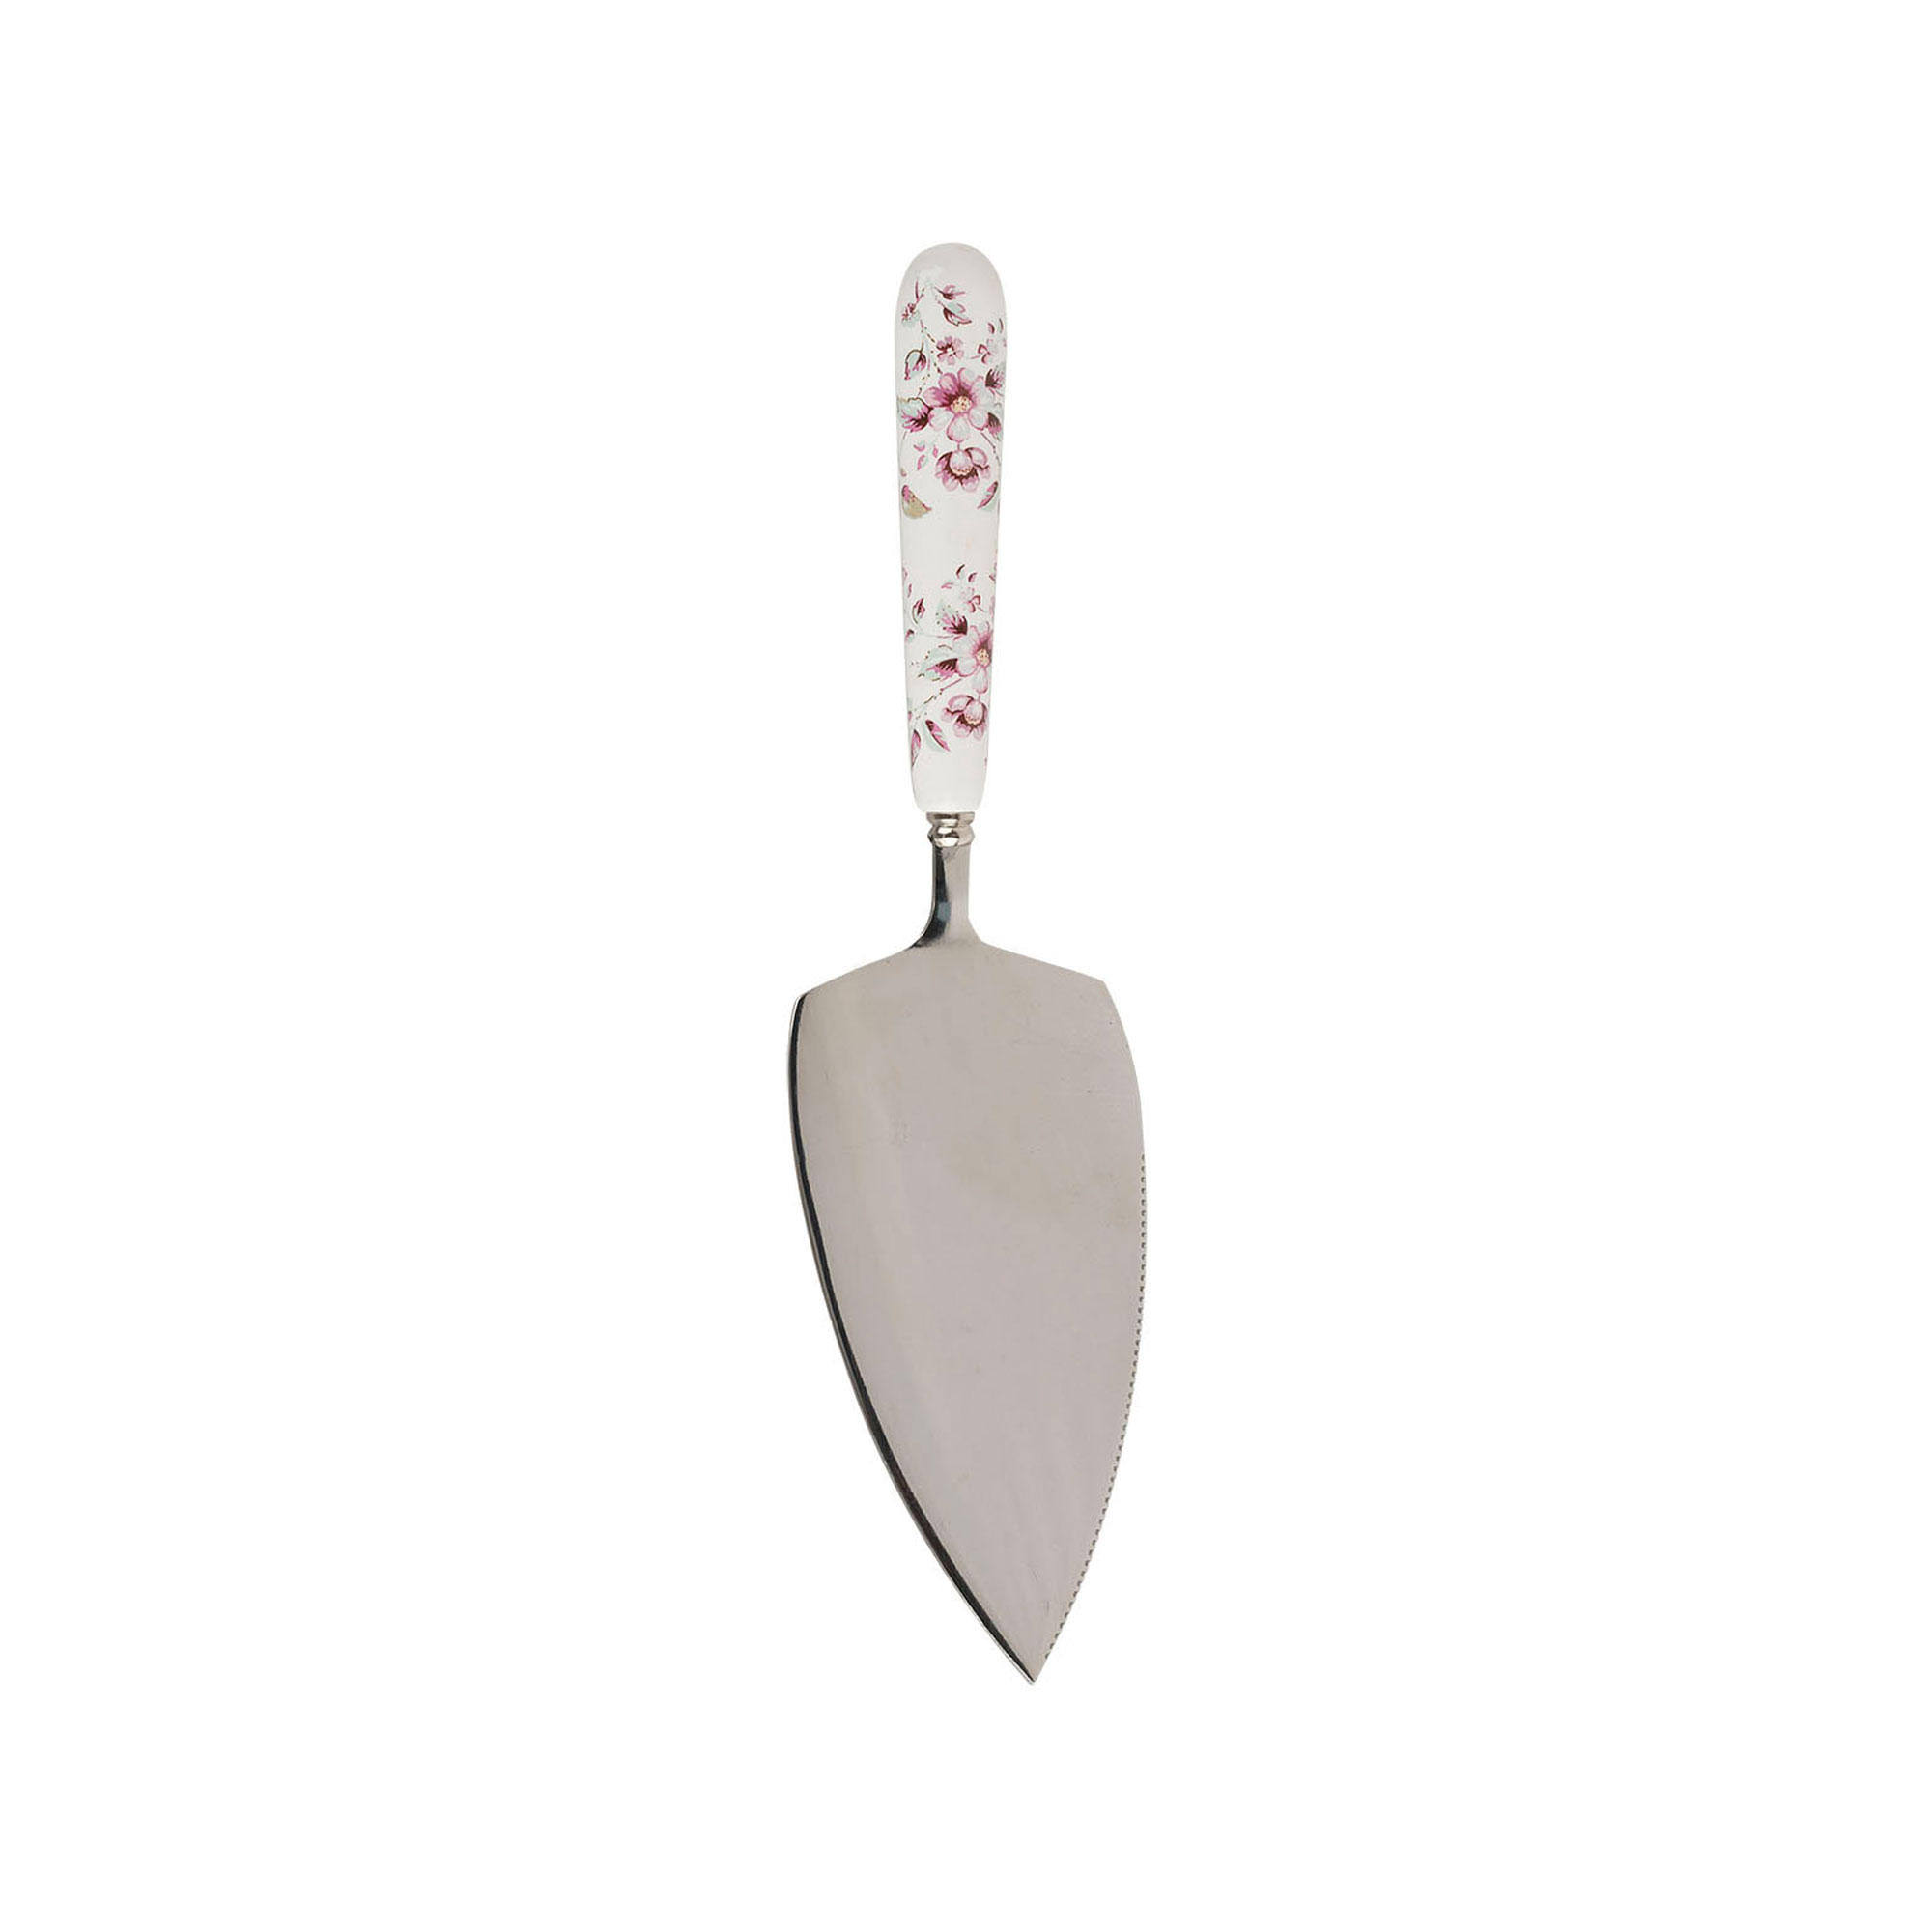 Kitchen Craft Katie Alice Ditsy Floral Stainless Steel Cake Slice with Porcelain Handle #dec